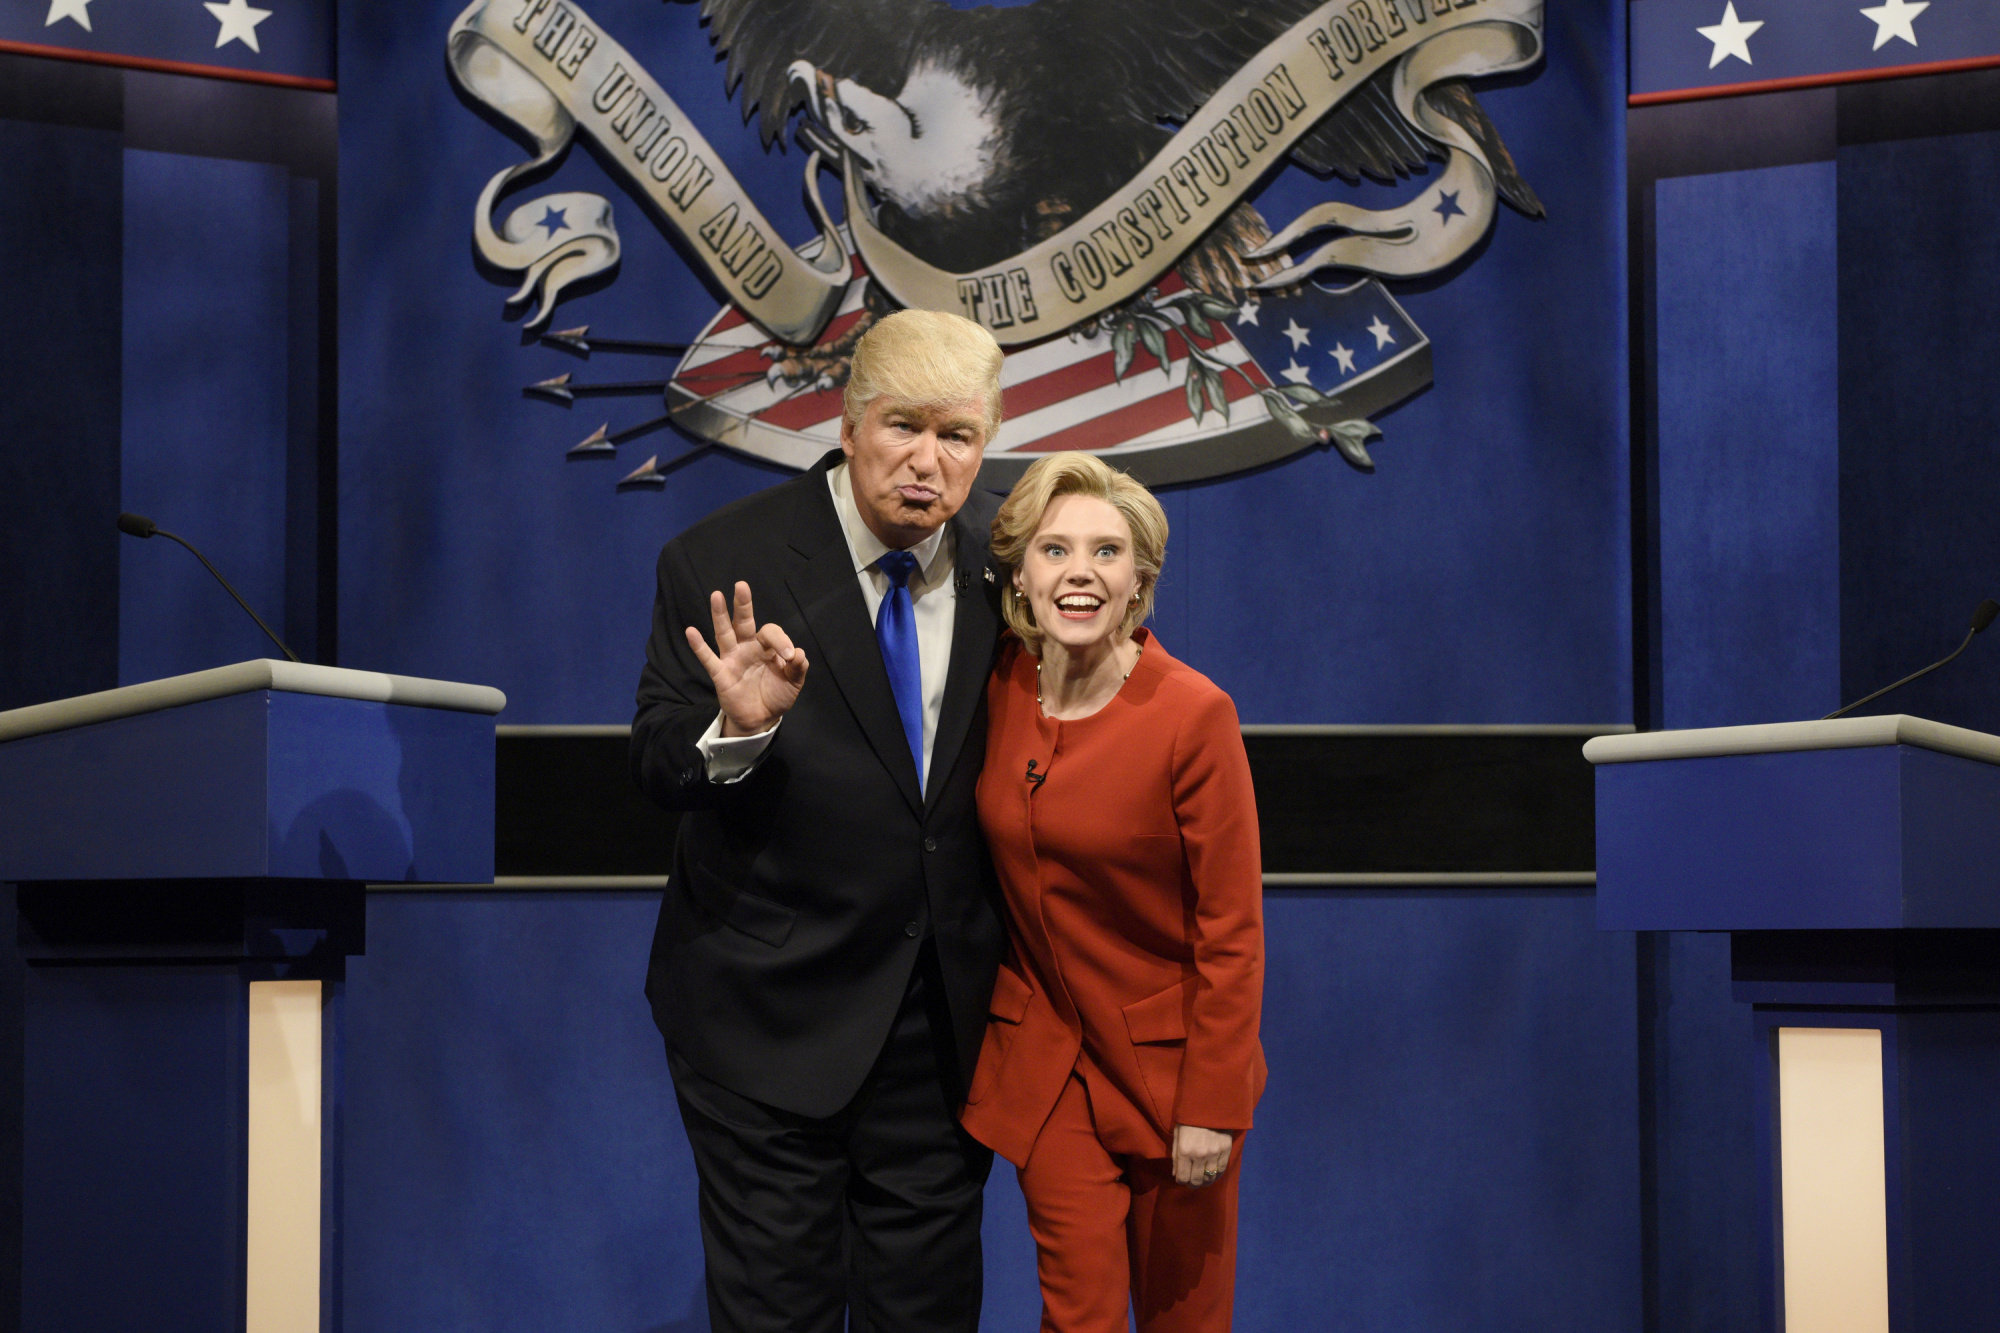 Alec Baldwin as Republican Presidential Candidate Donald Trump and Kate McKinnon as Democratic Presidential Candidate Hillary Clinton during the &quot;Debate Cold Open&quot; sketch on Saturday Night Live October 1, 2016.
